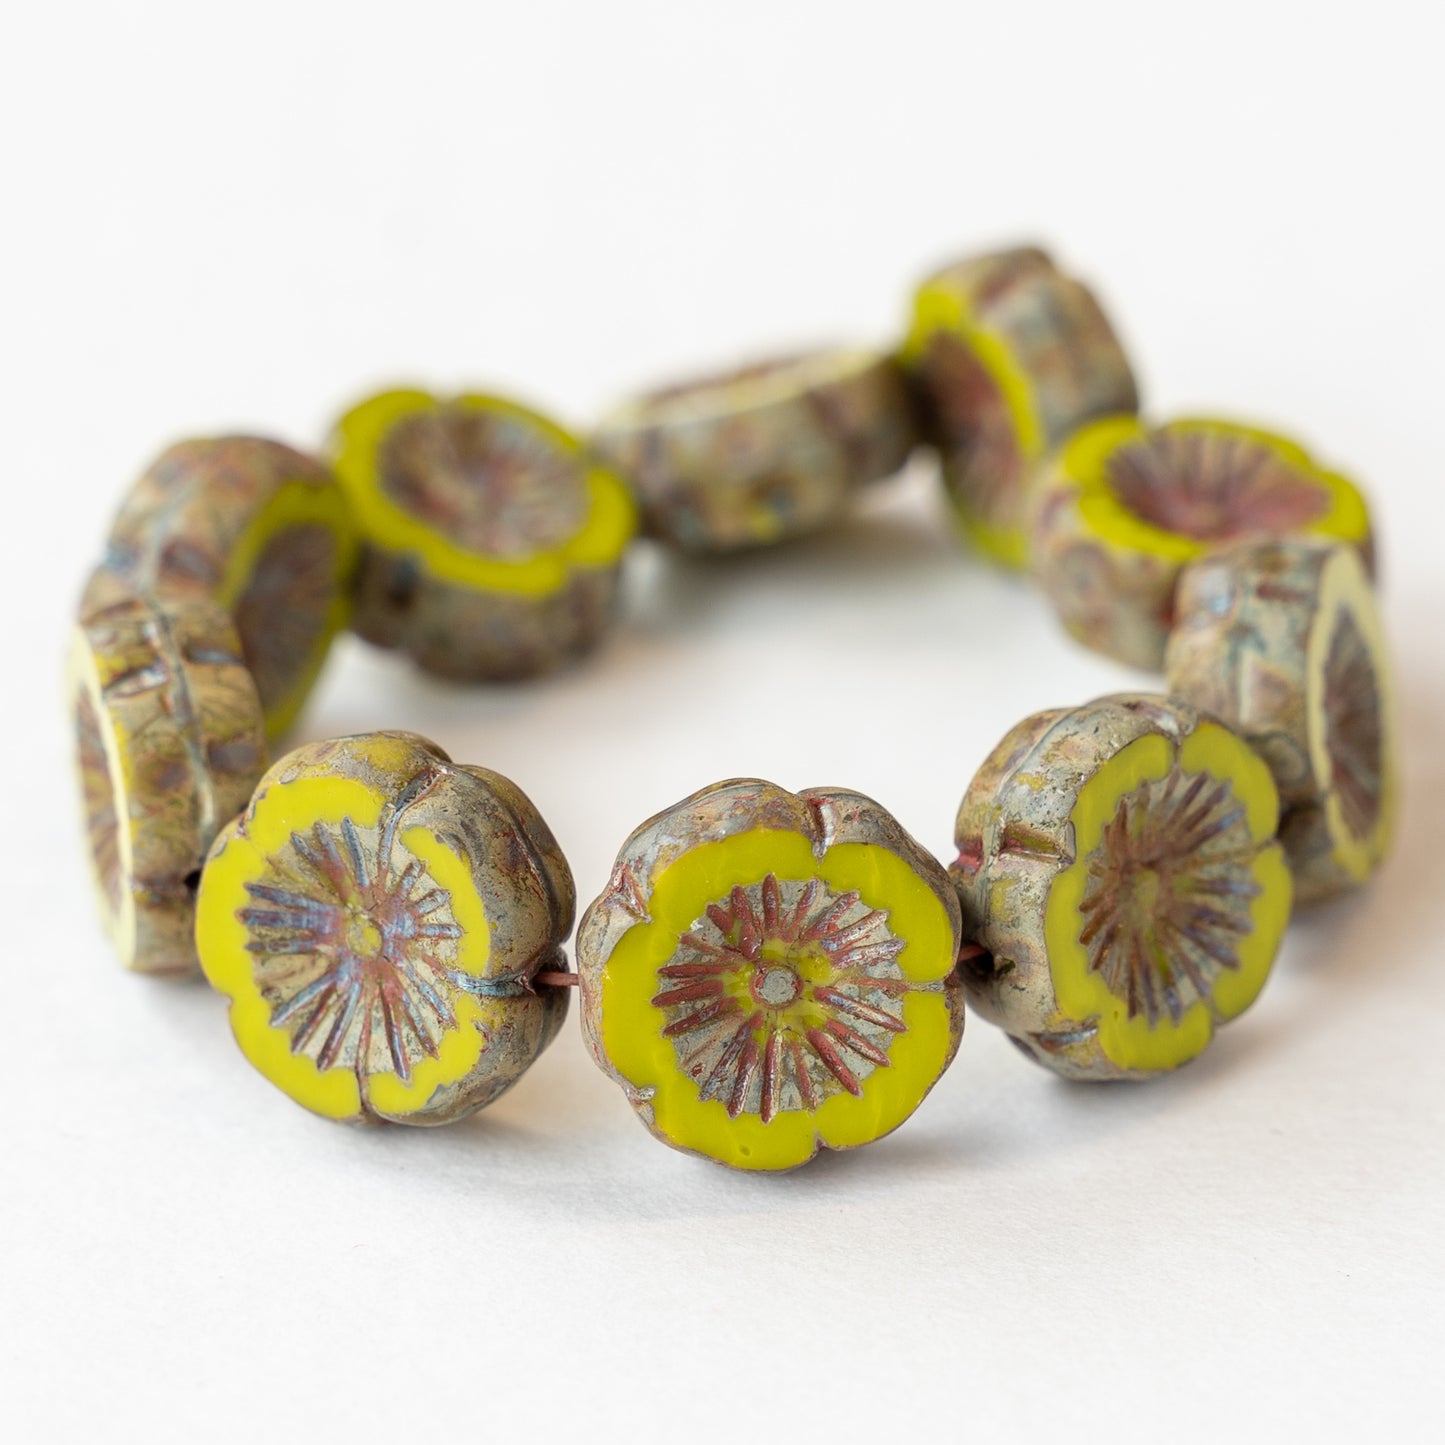 14mm Hibiscus Flower Bead - Lime with Picasso Center - 10 Beads